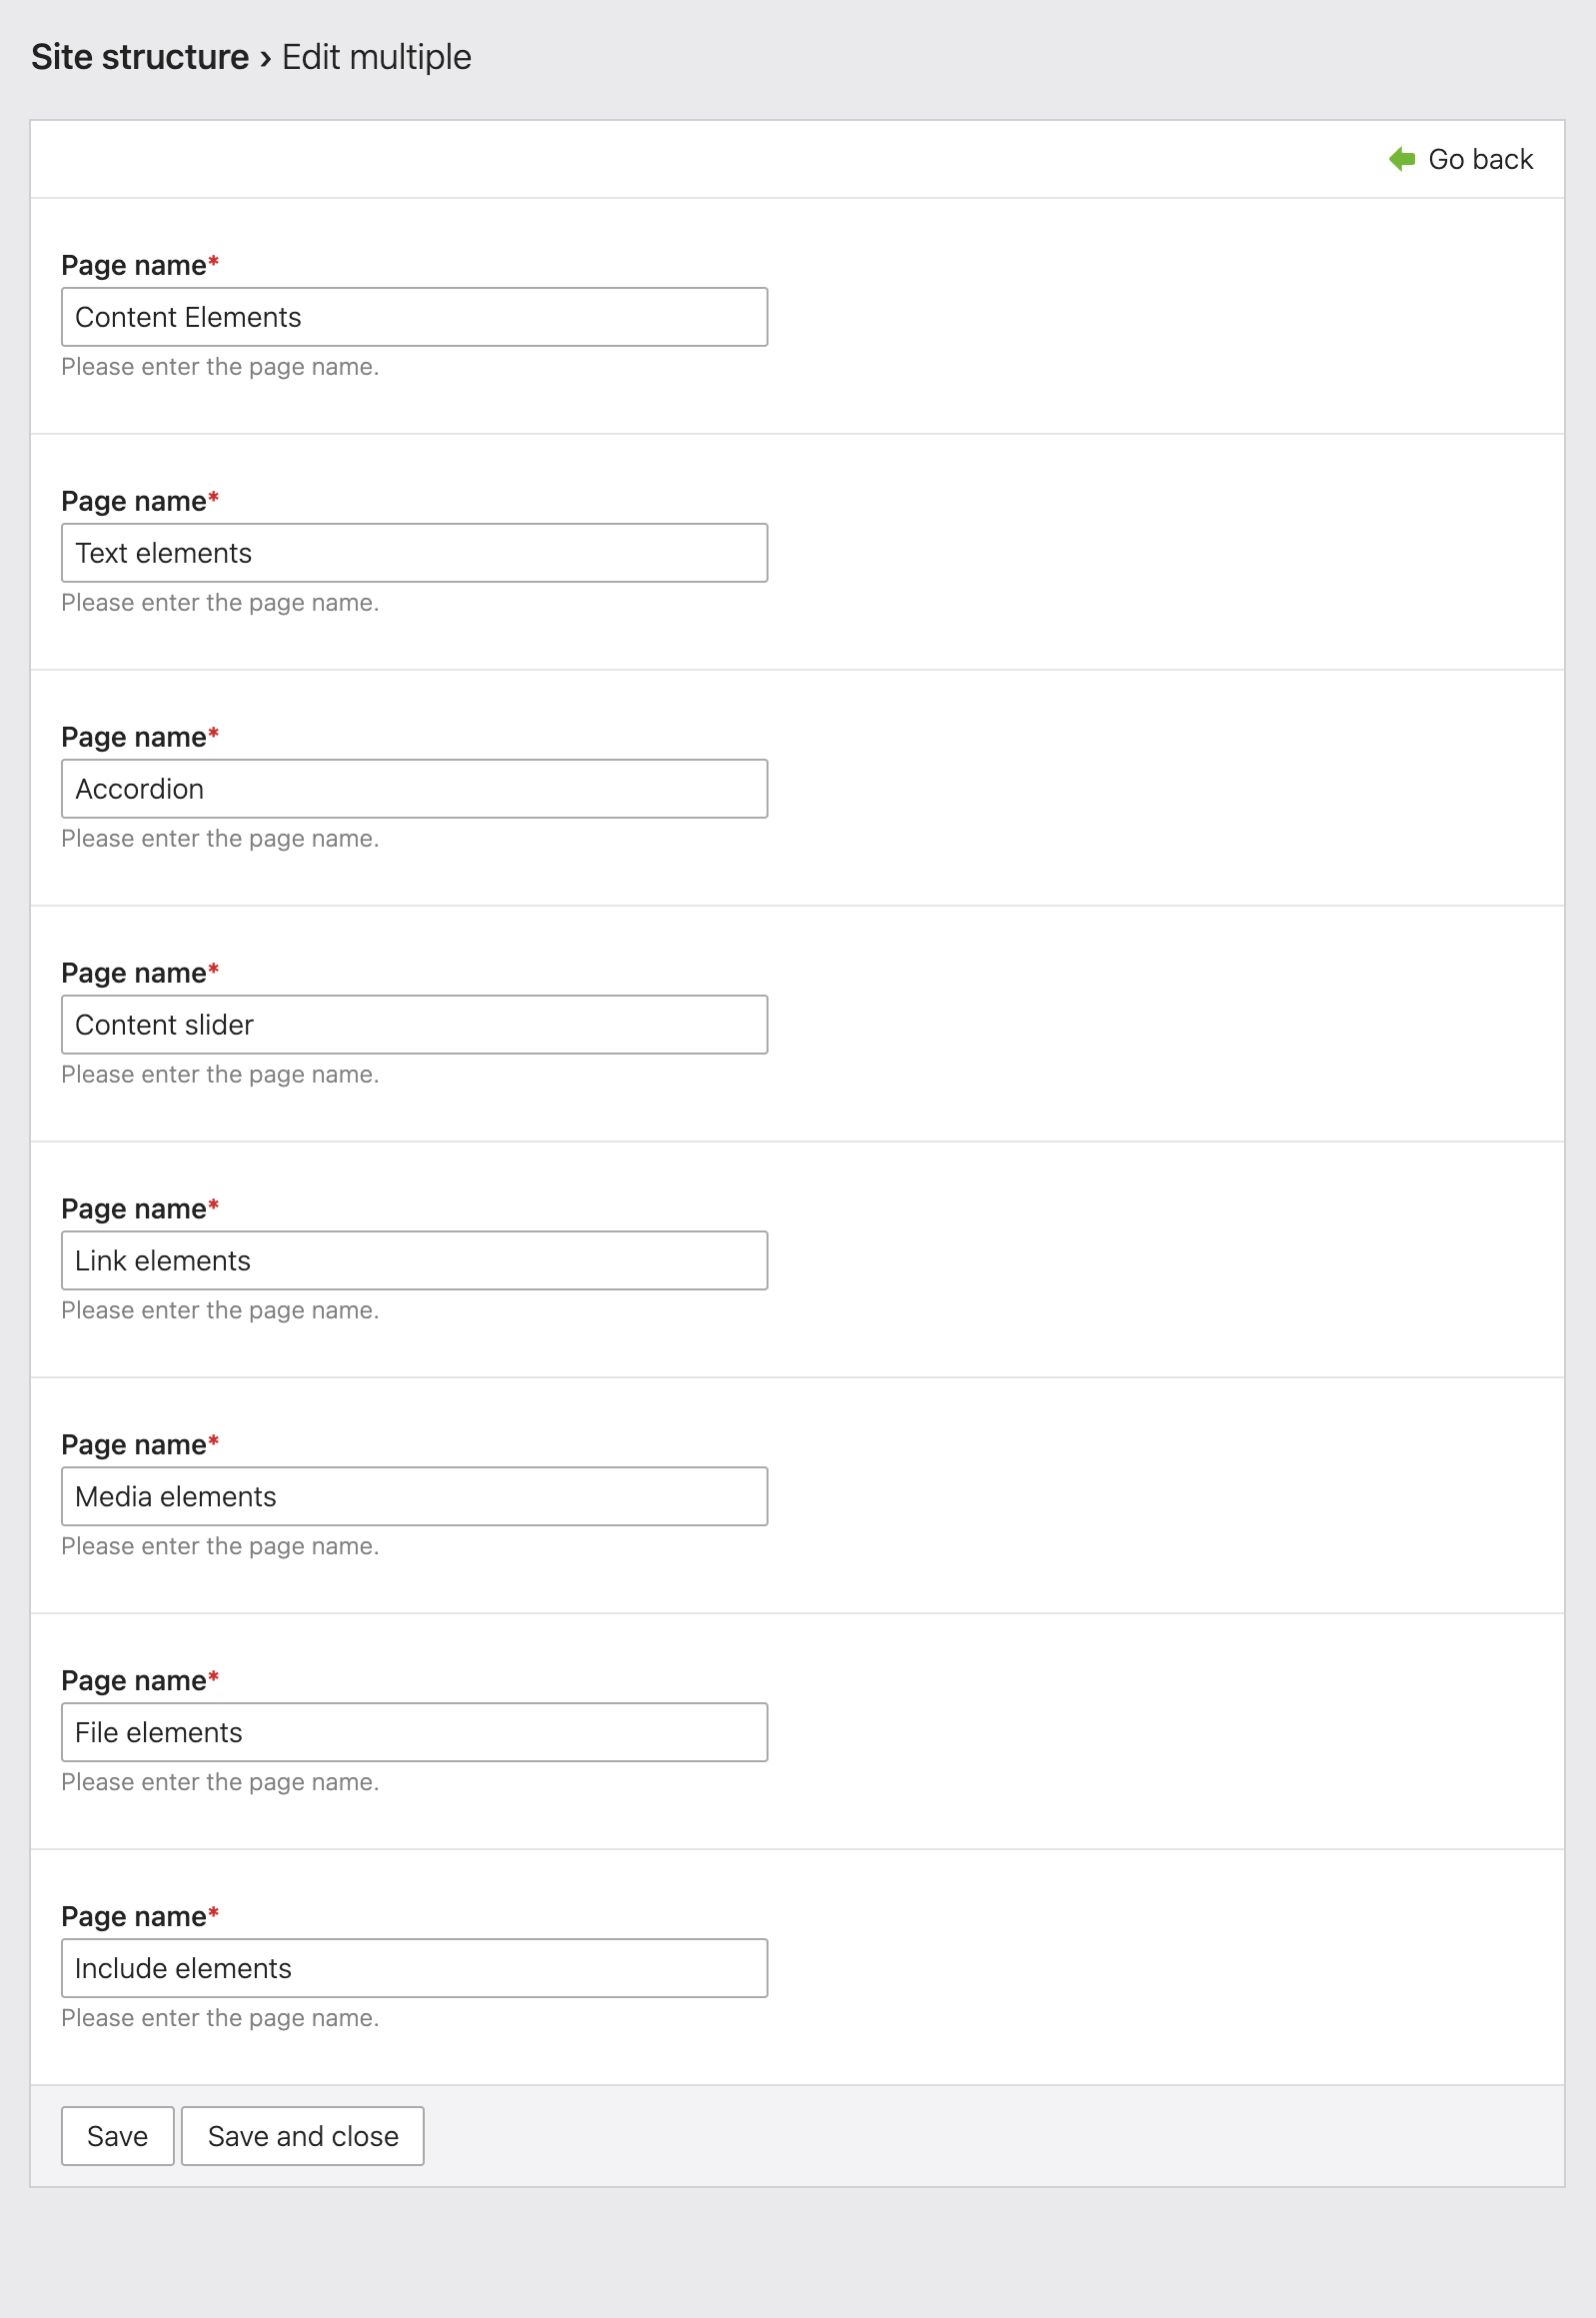 Only the selected input fields are displayed